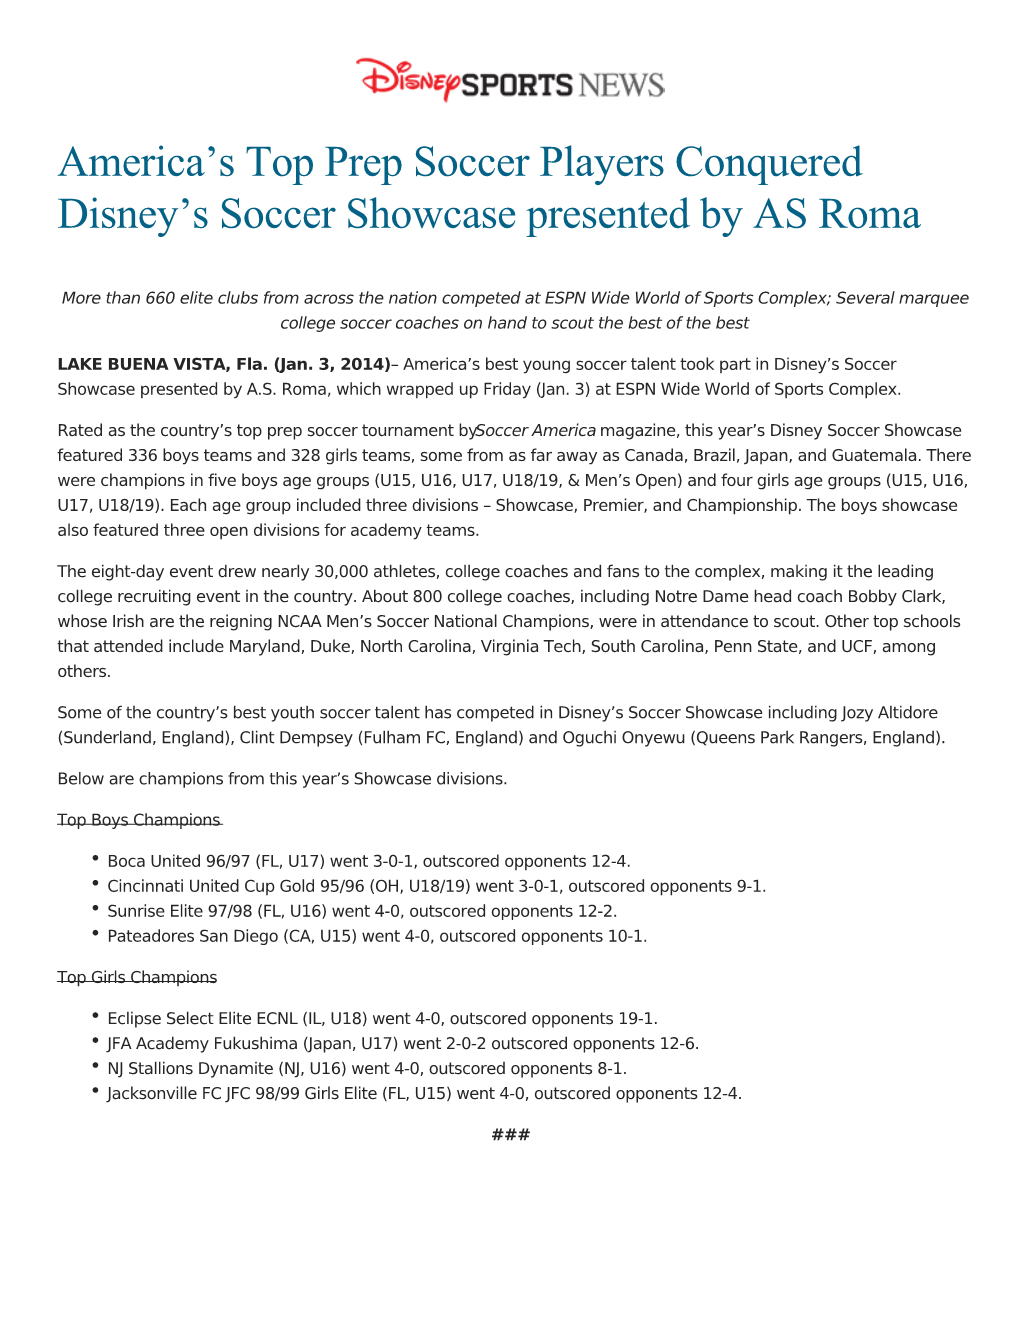 America's Top Prep Soccer Players Conquered Disney's Soccer